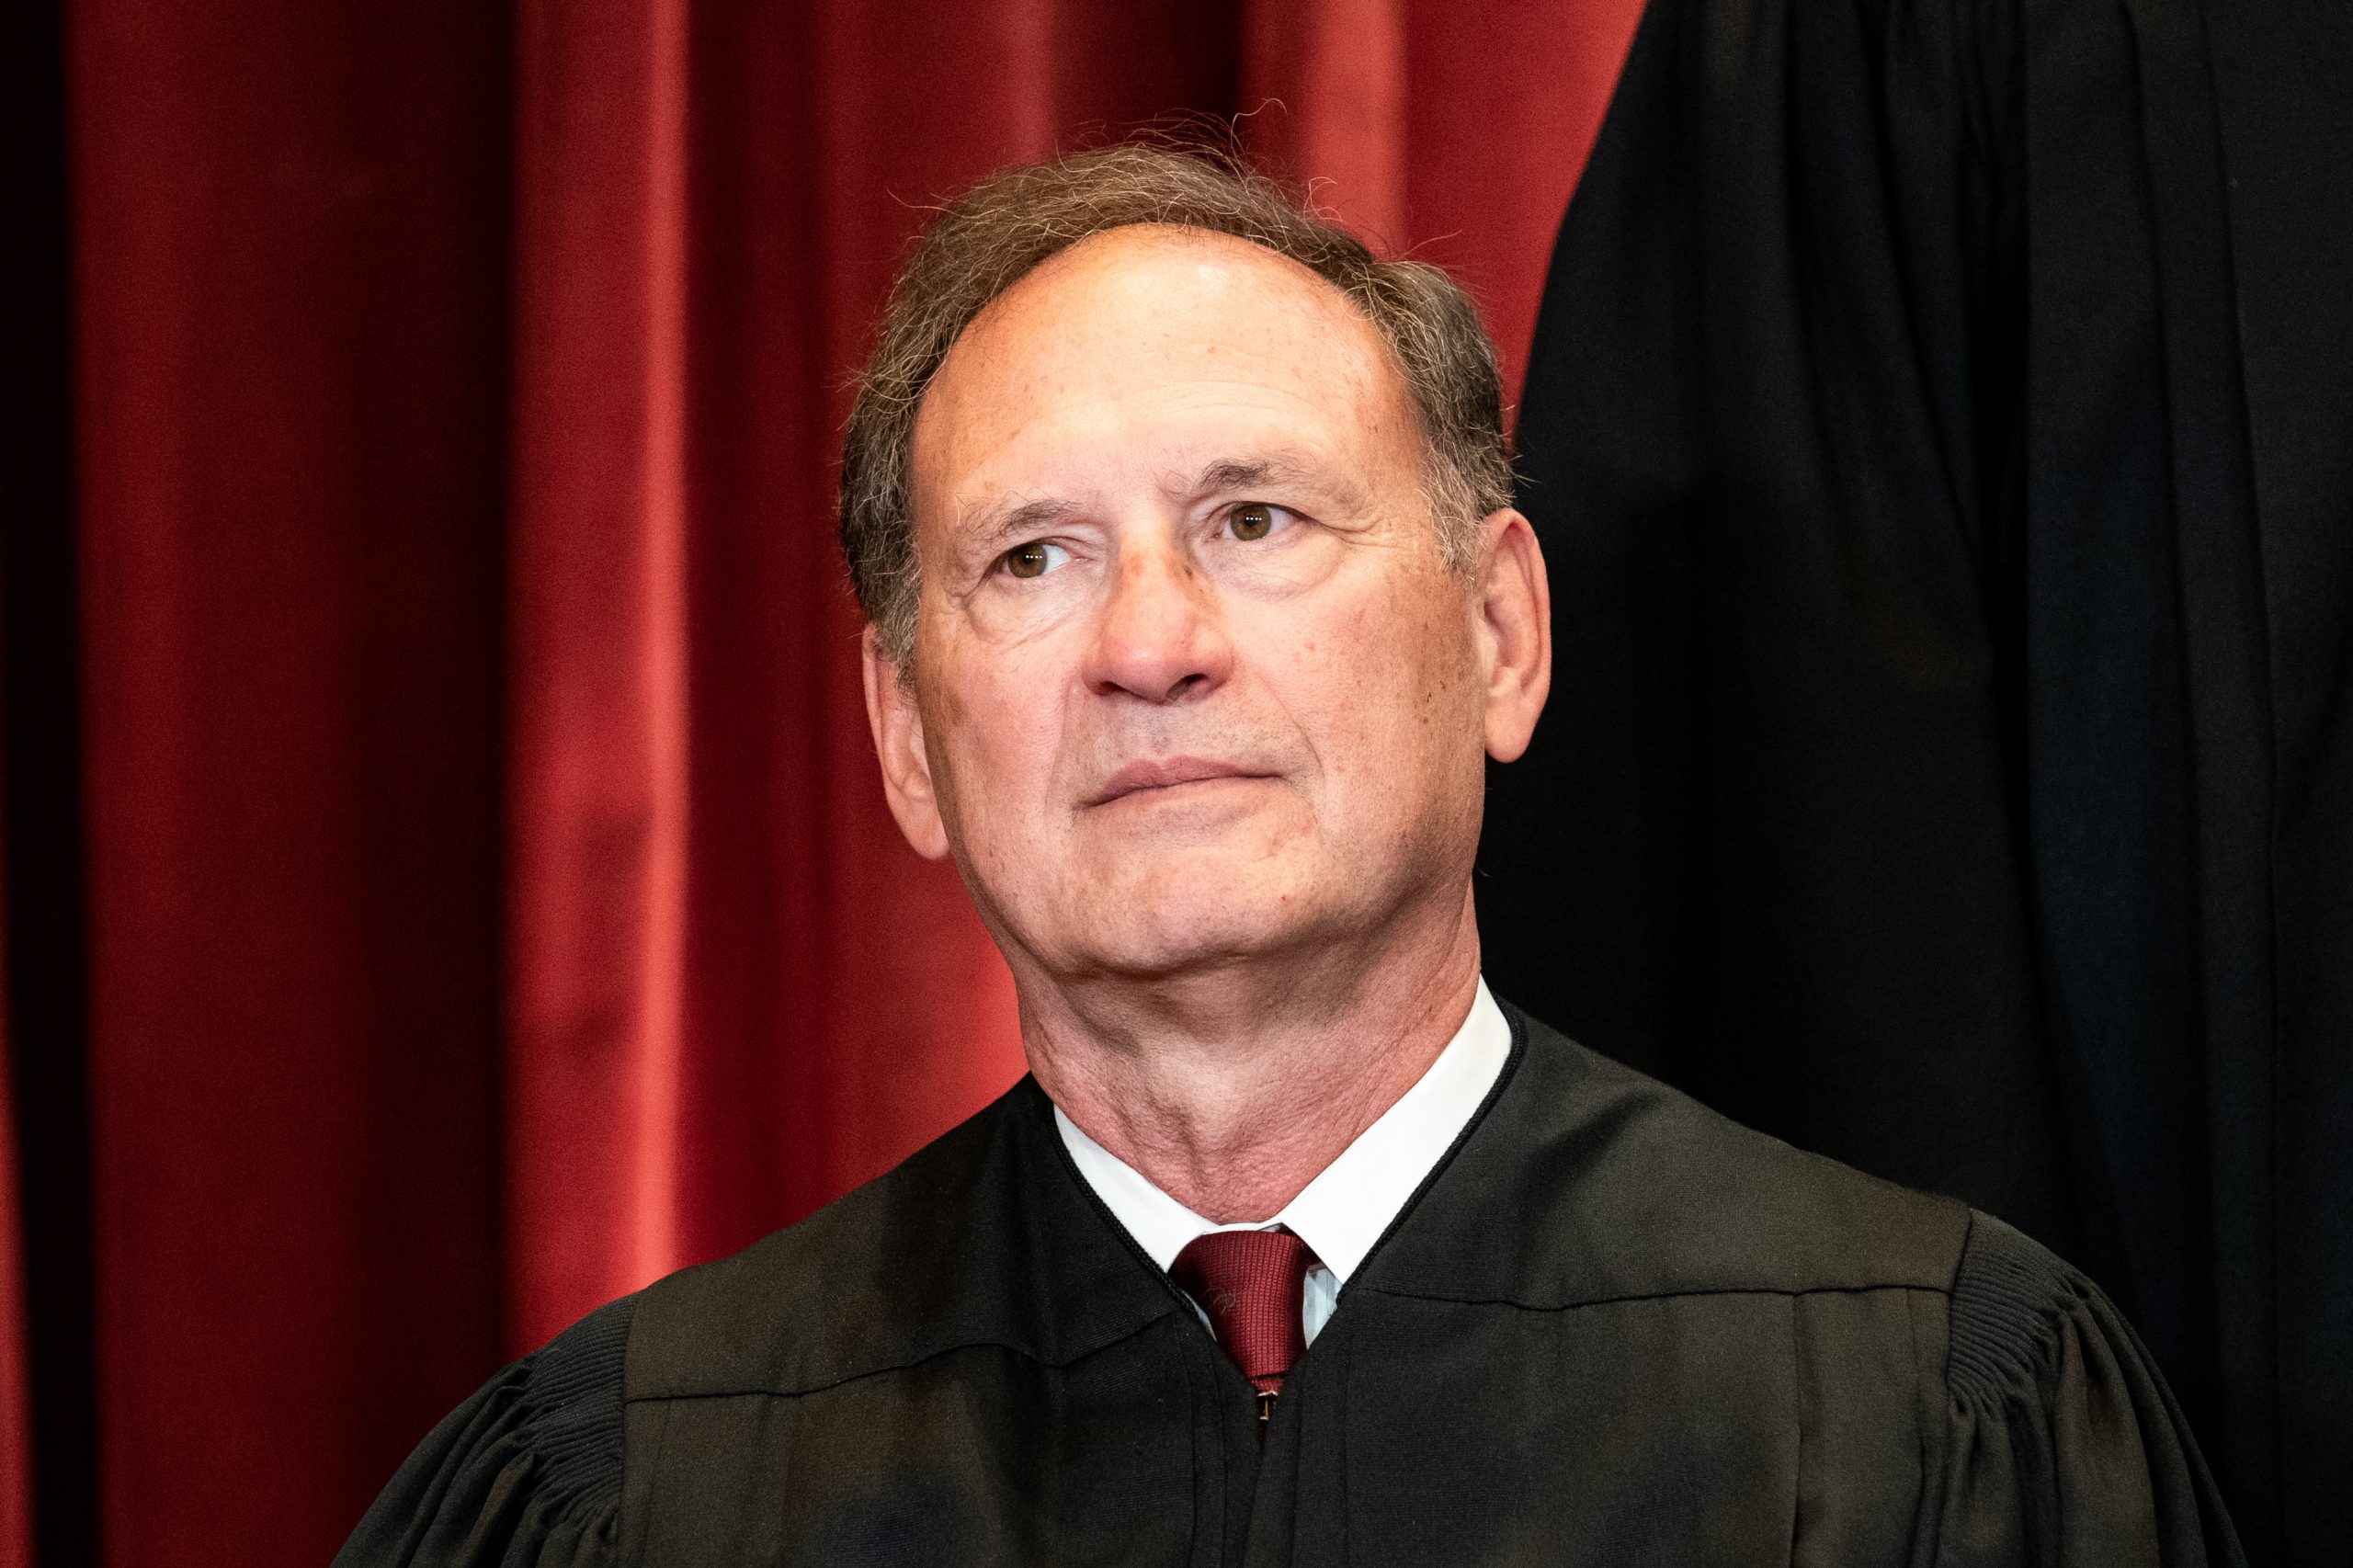 Alito skips conference appearance after draft opinion disclosure